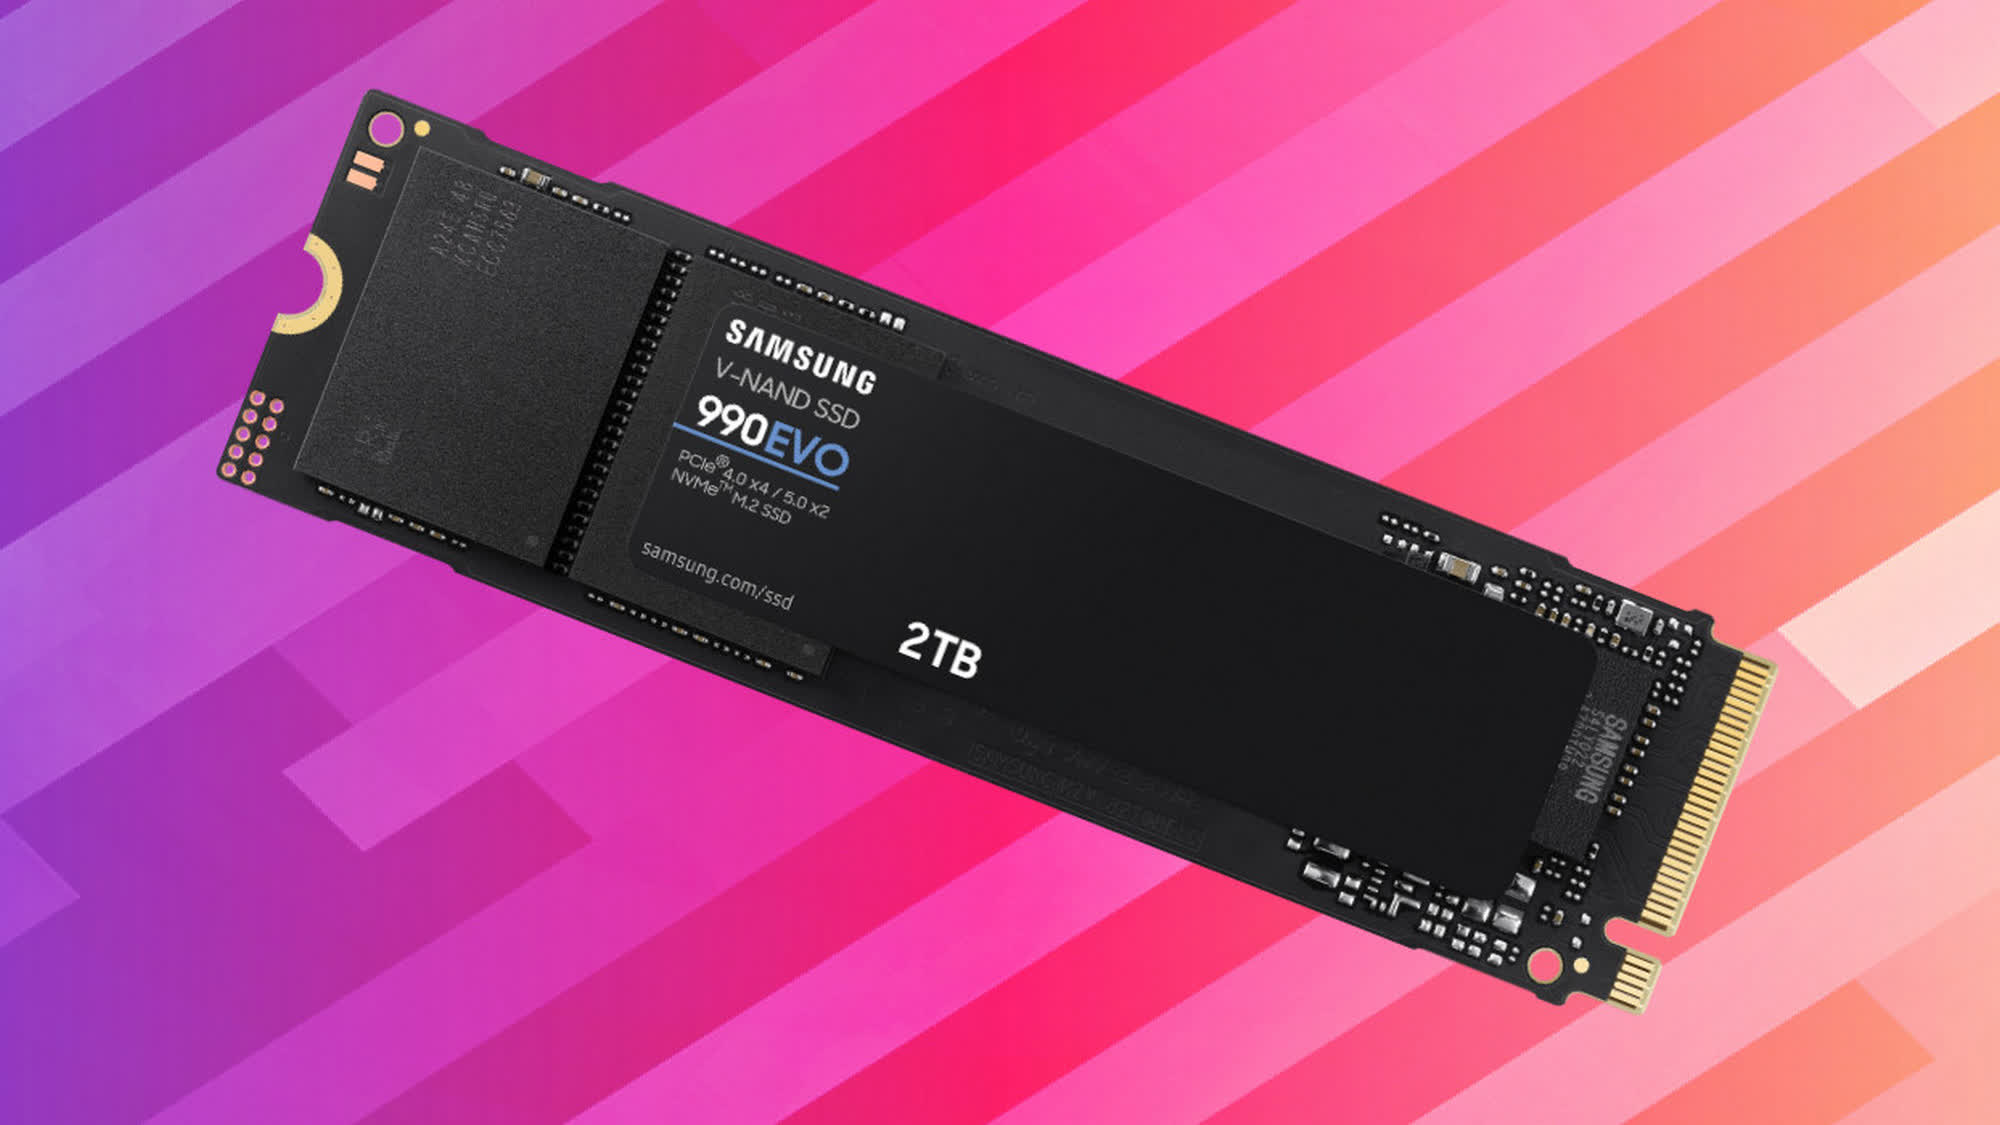 Samsung's new 990 EVO PCIe SSD offers both PCIe 4.0 x4 and PCIe 5.0 x2 connectivity